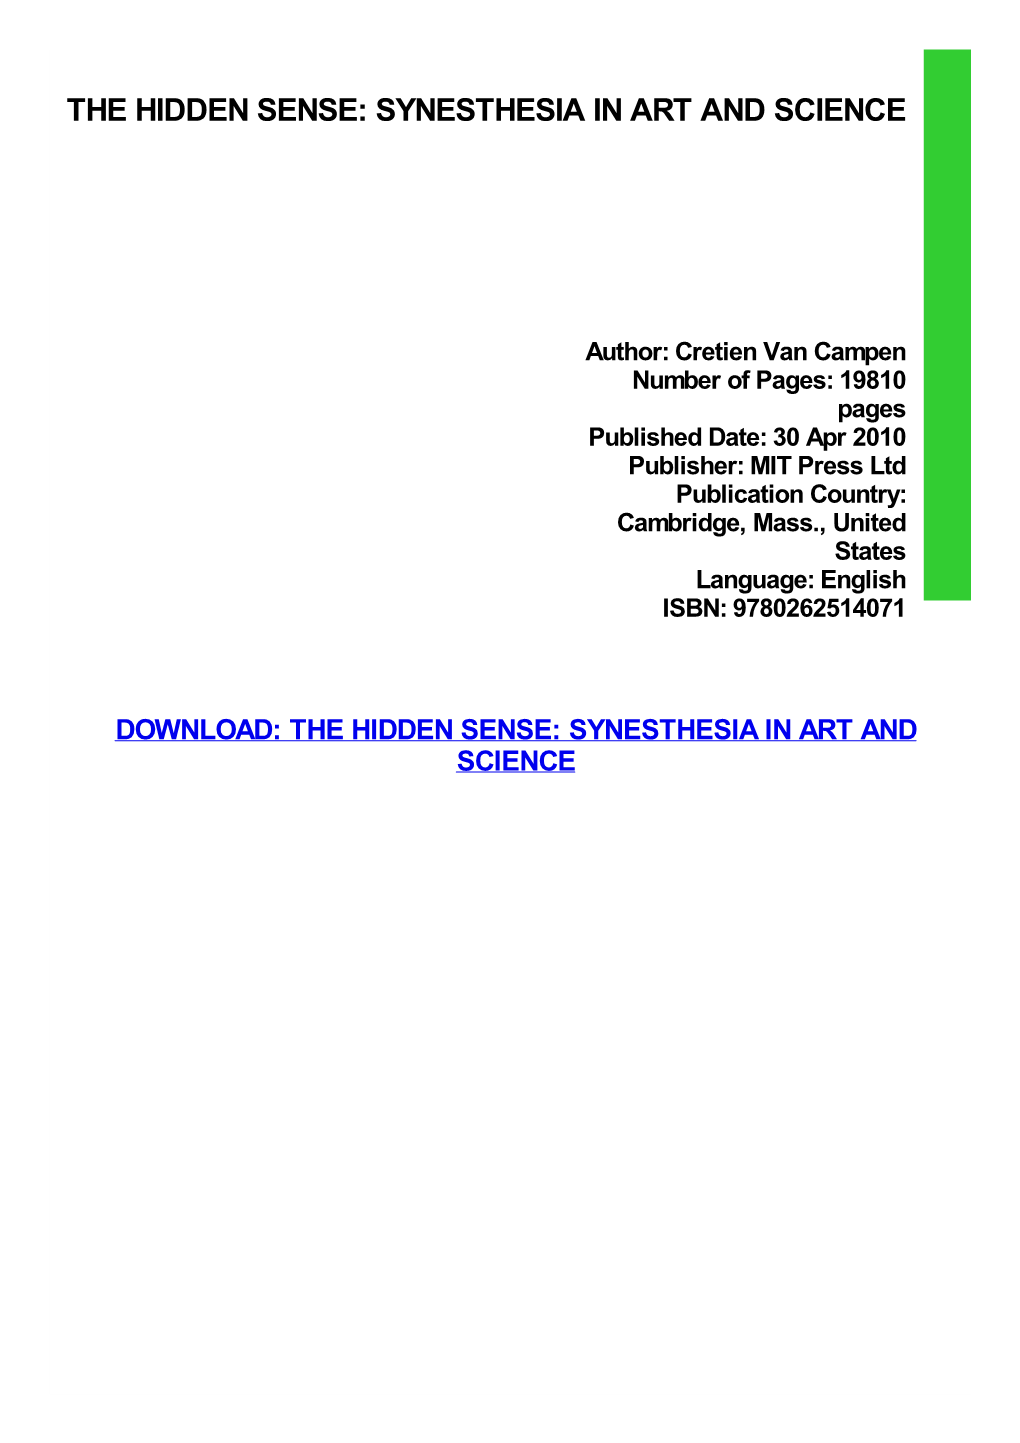 The Hidden Sense: Synesthesia in Art and Science Pdf Free